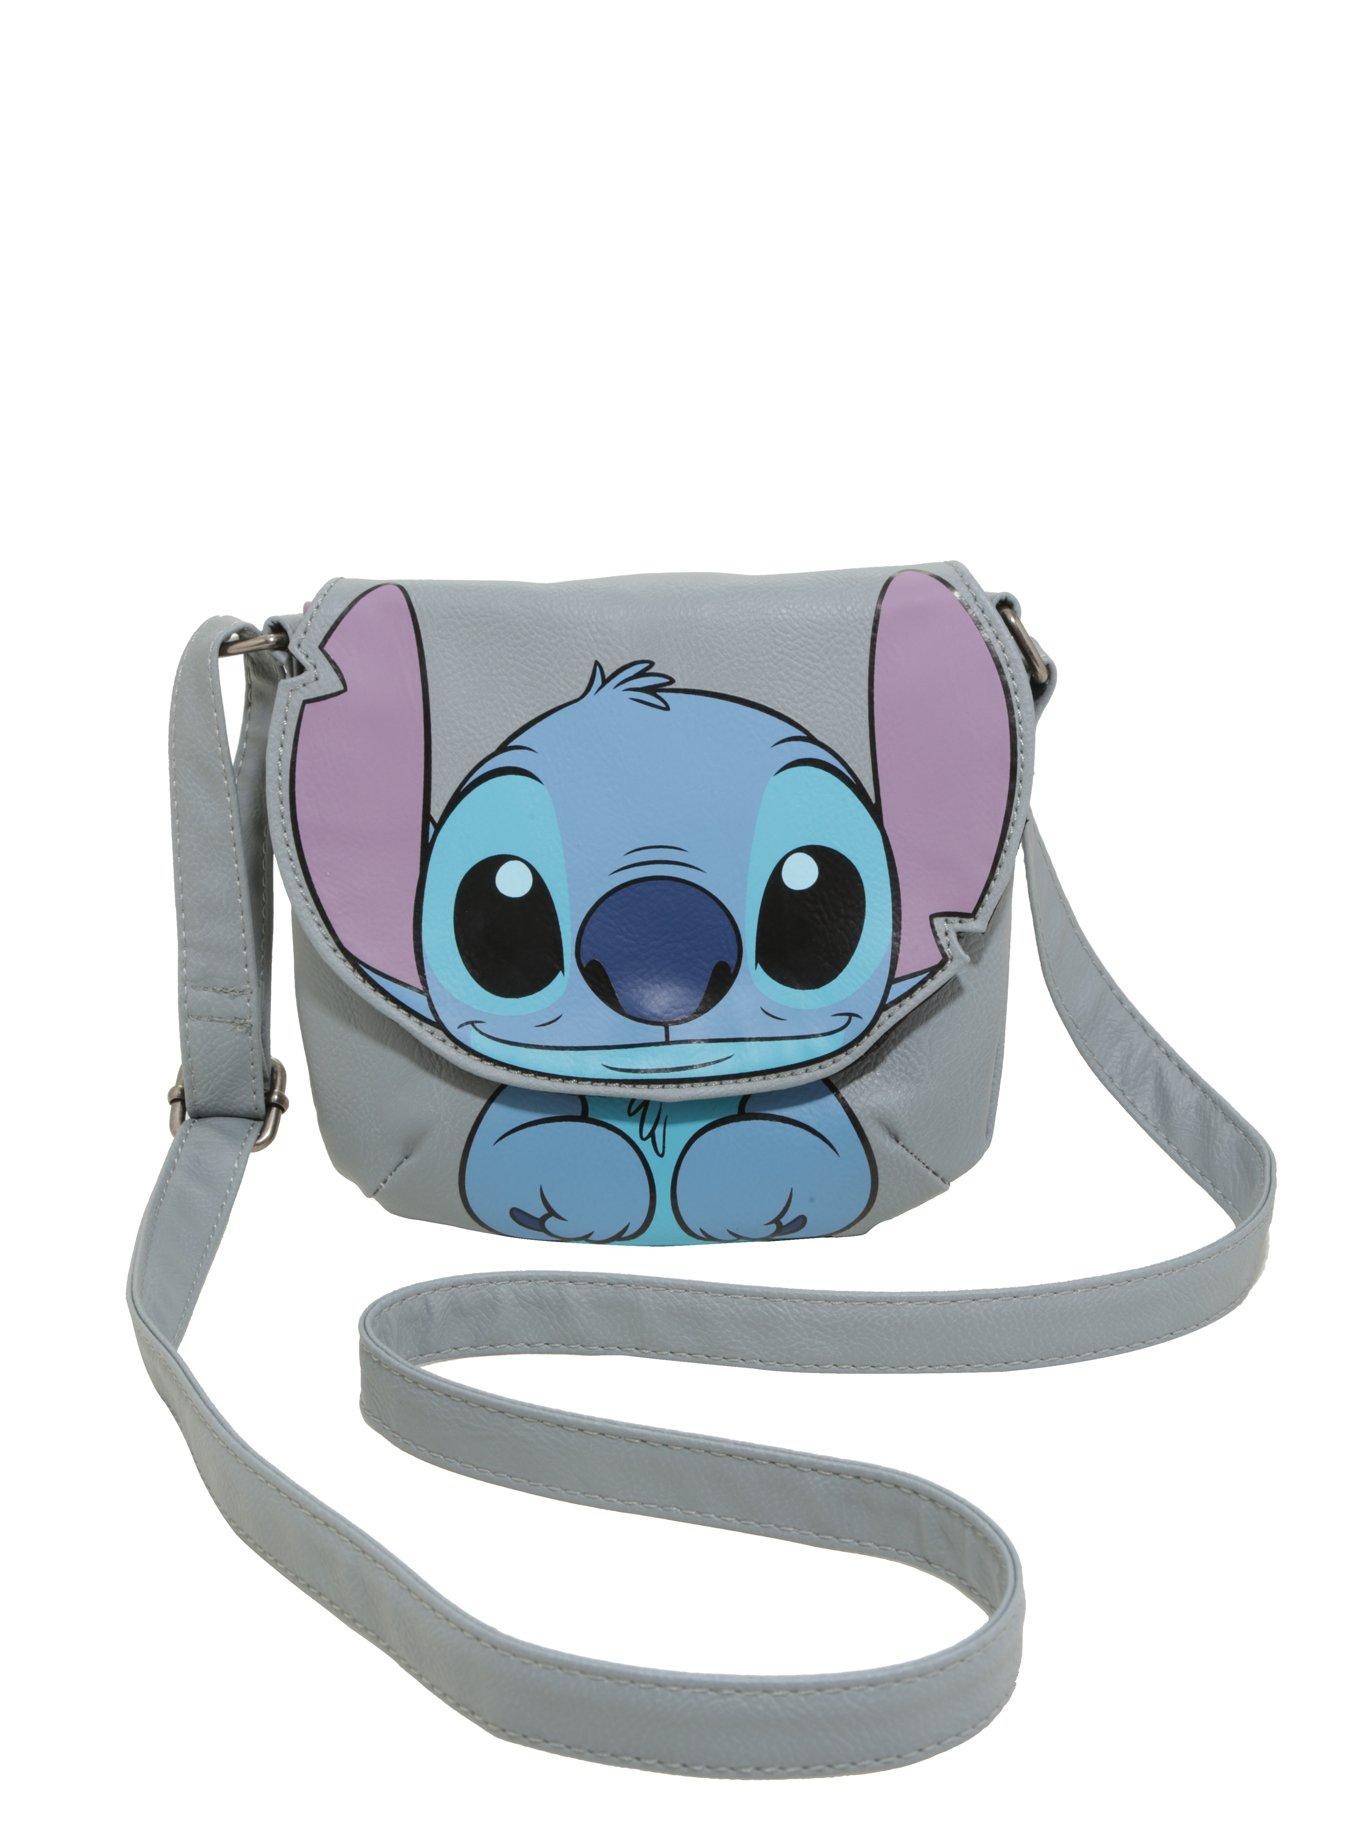  Stitch Cross Body Bag with Shoulder Strap,ANEIMIAH